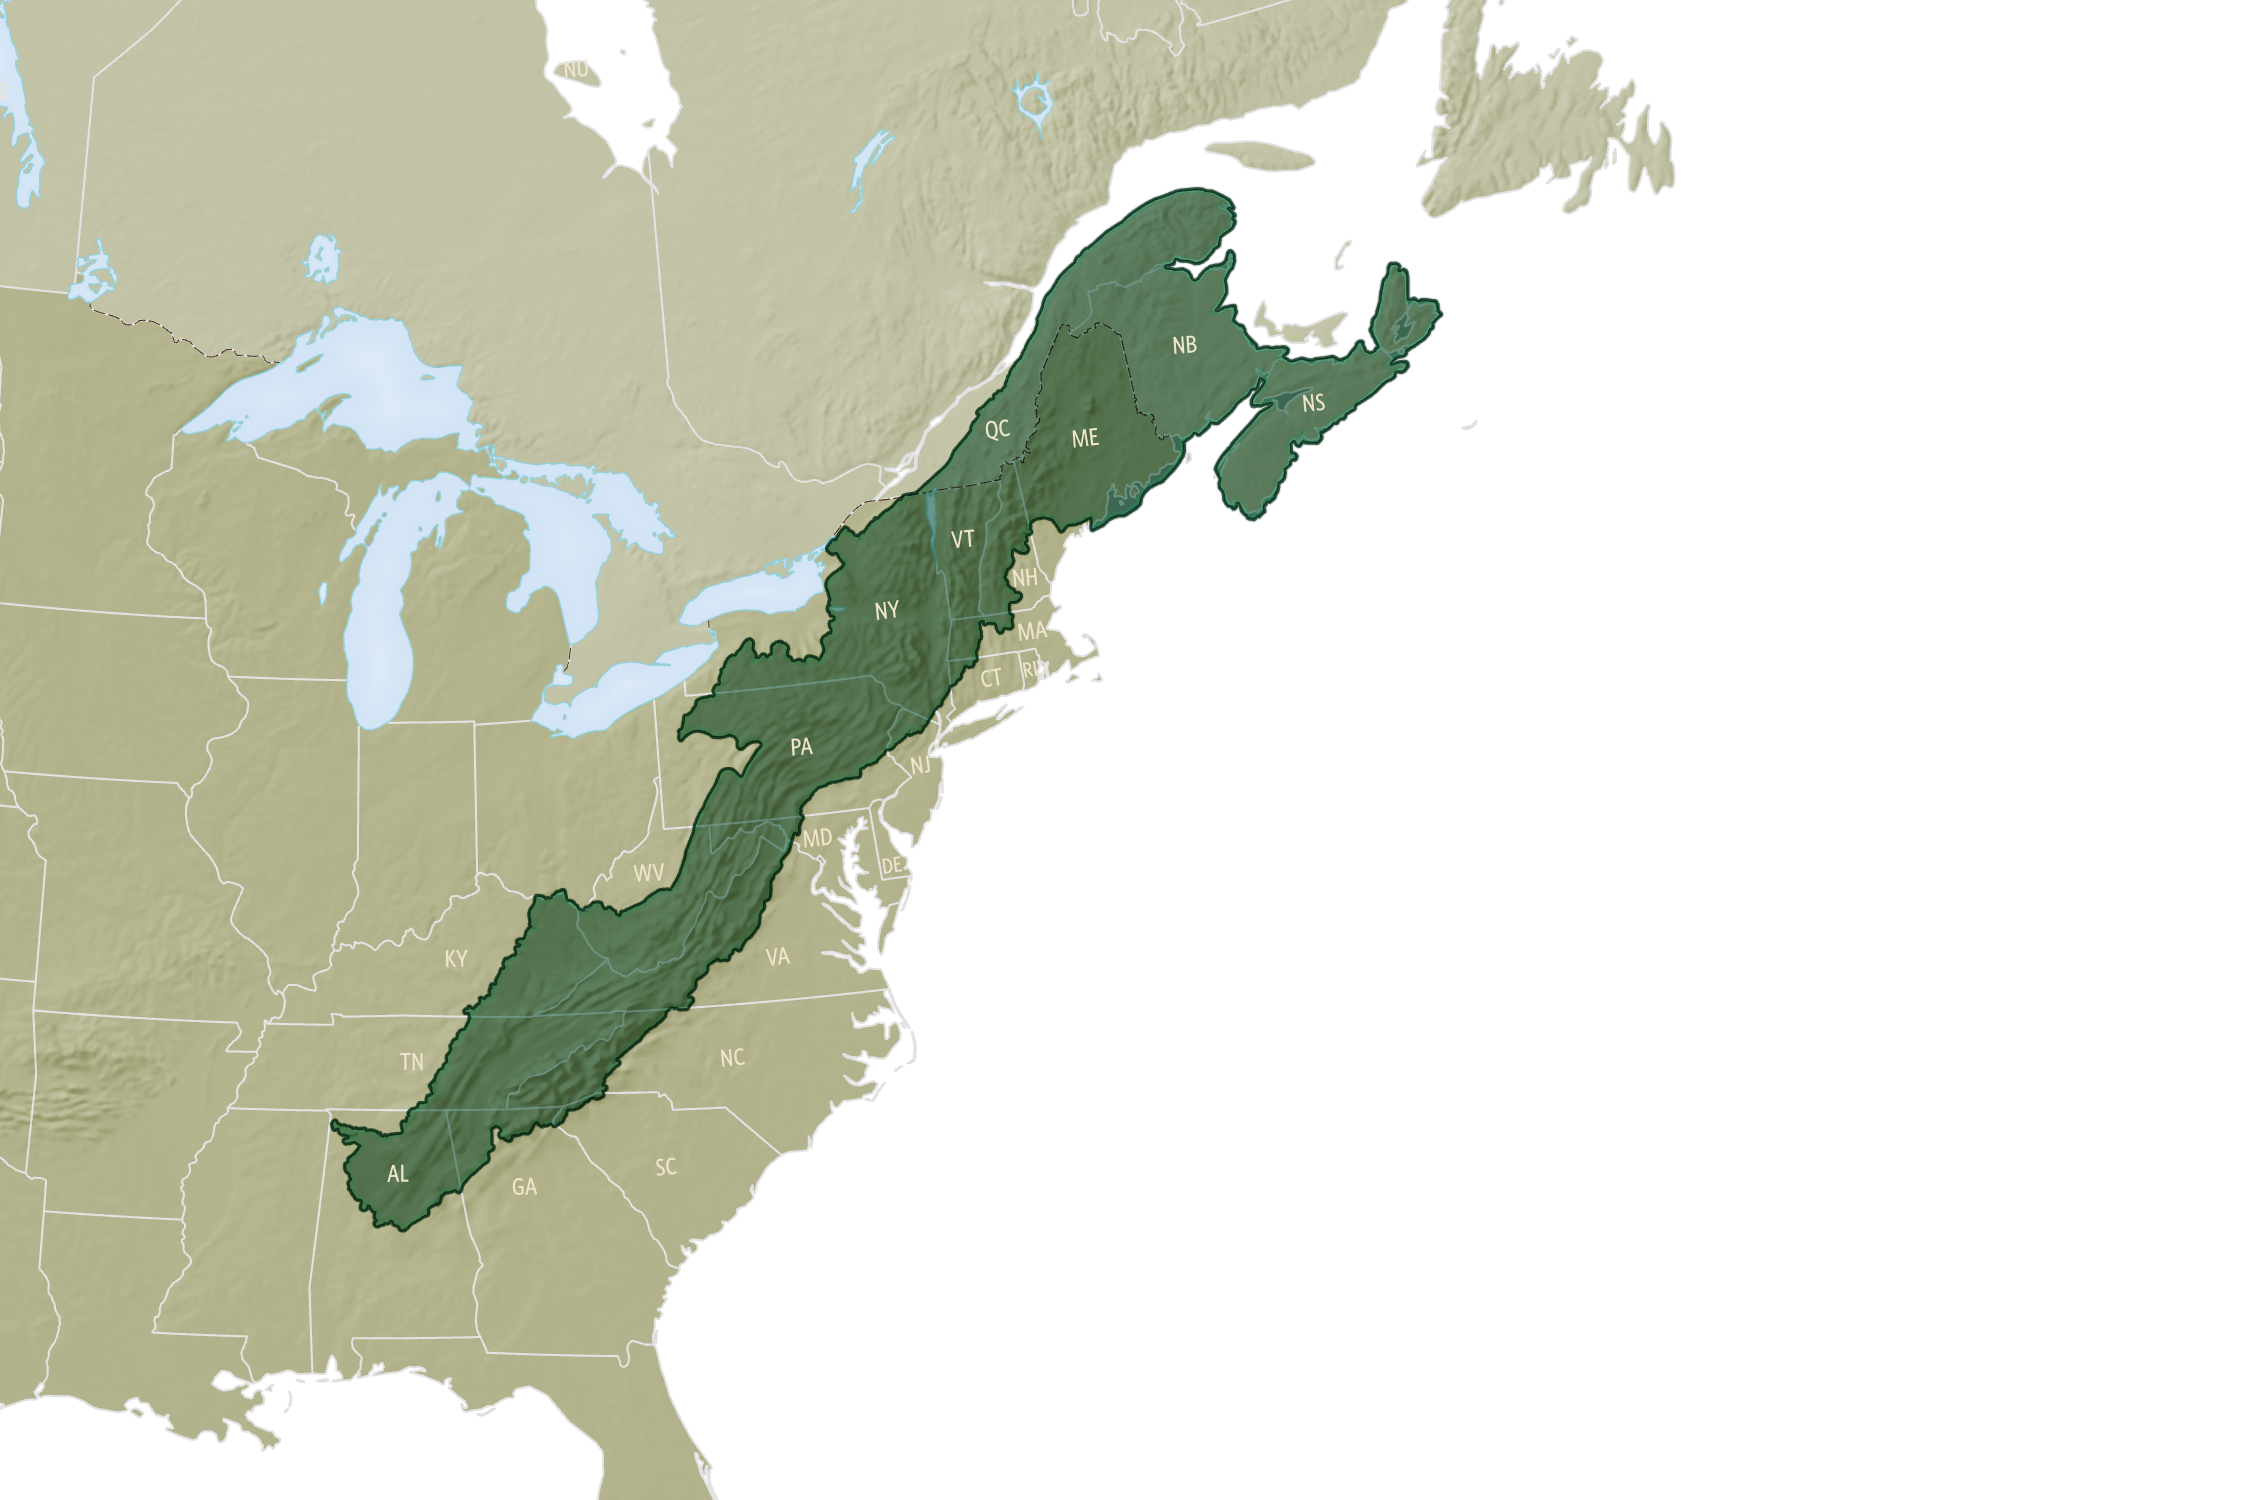 A map of the east coast showing the Appalachian mountain range in dark green.